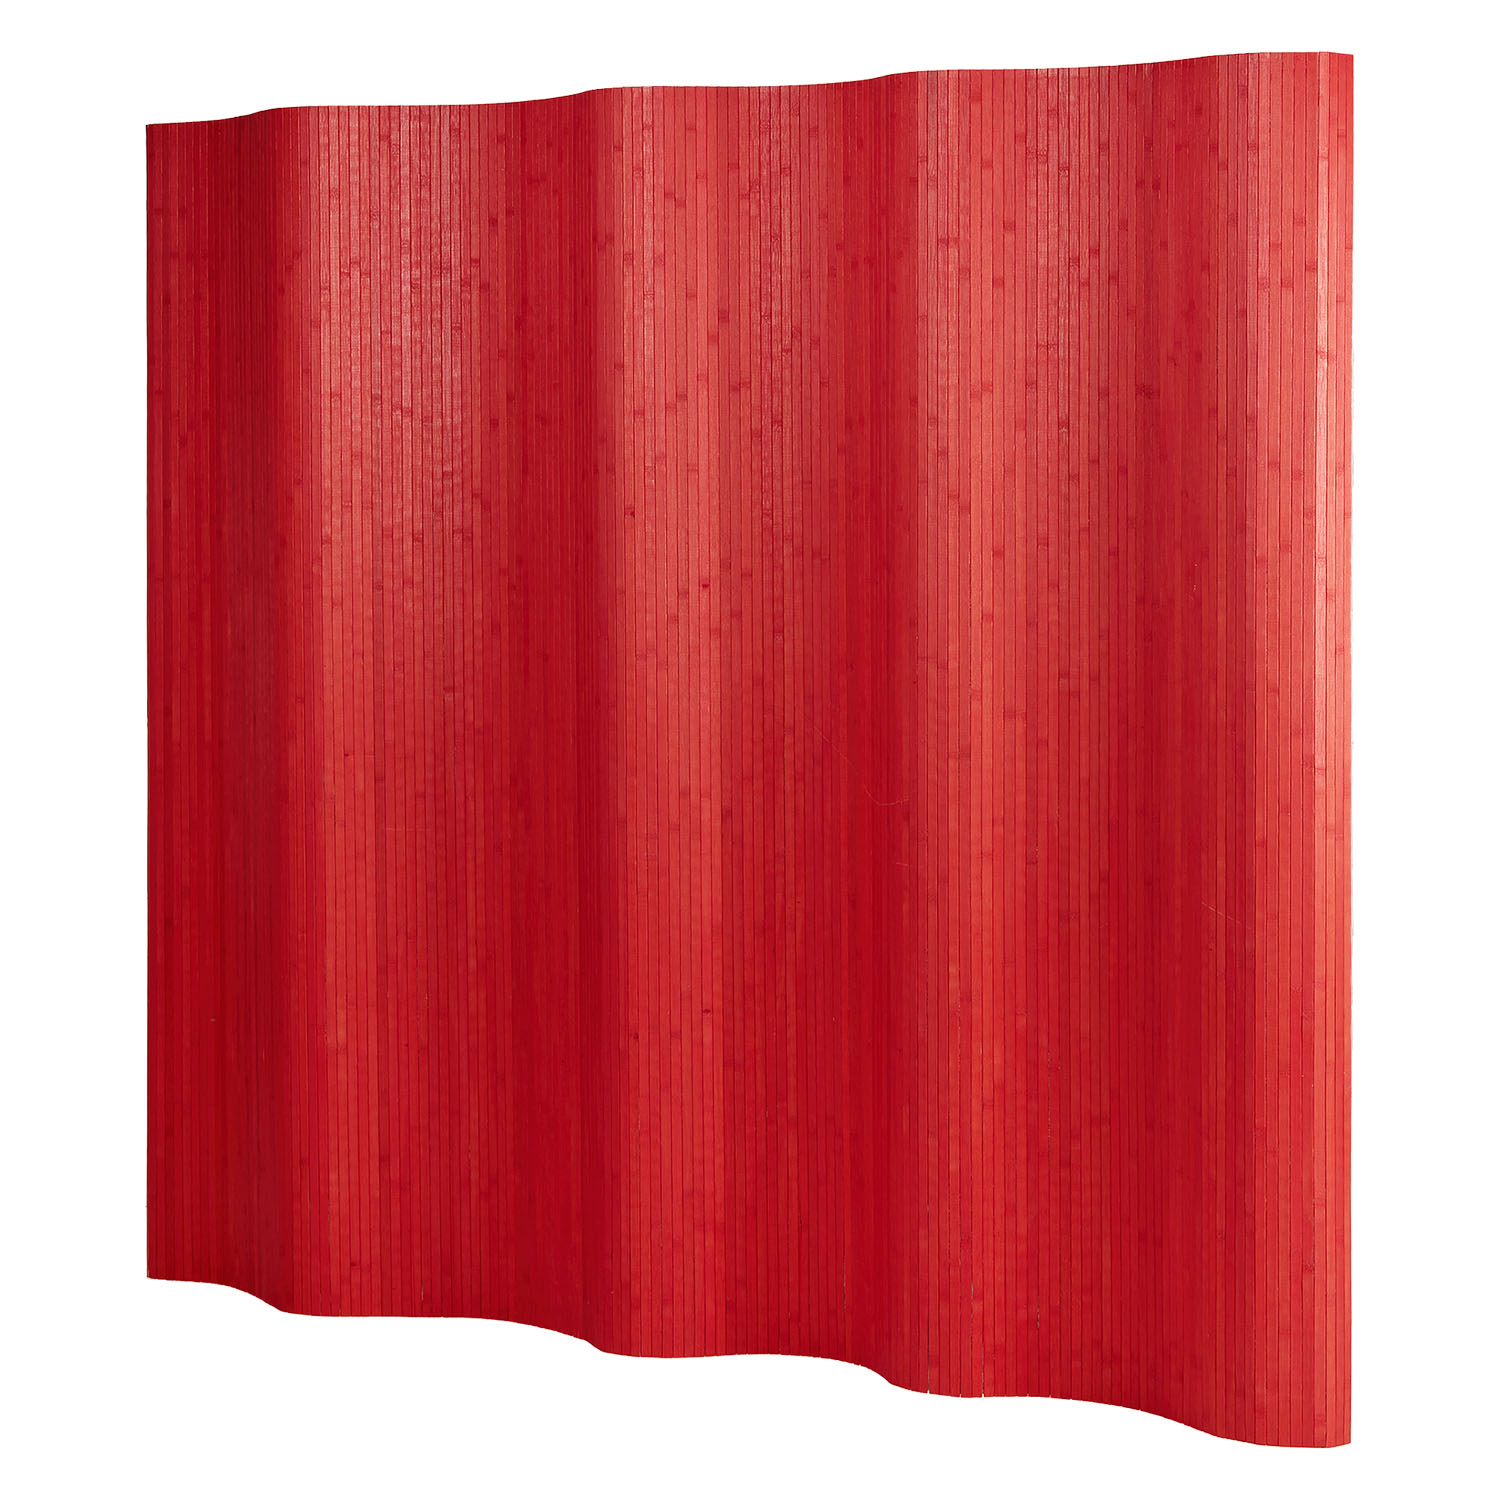 Paravent Room Divider Bamboo 200 x 250 cm Privacy Screen Spanish Wall